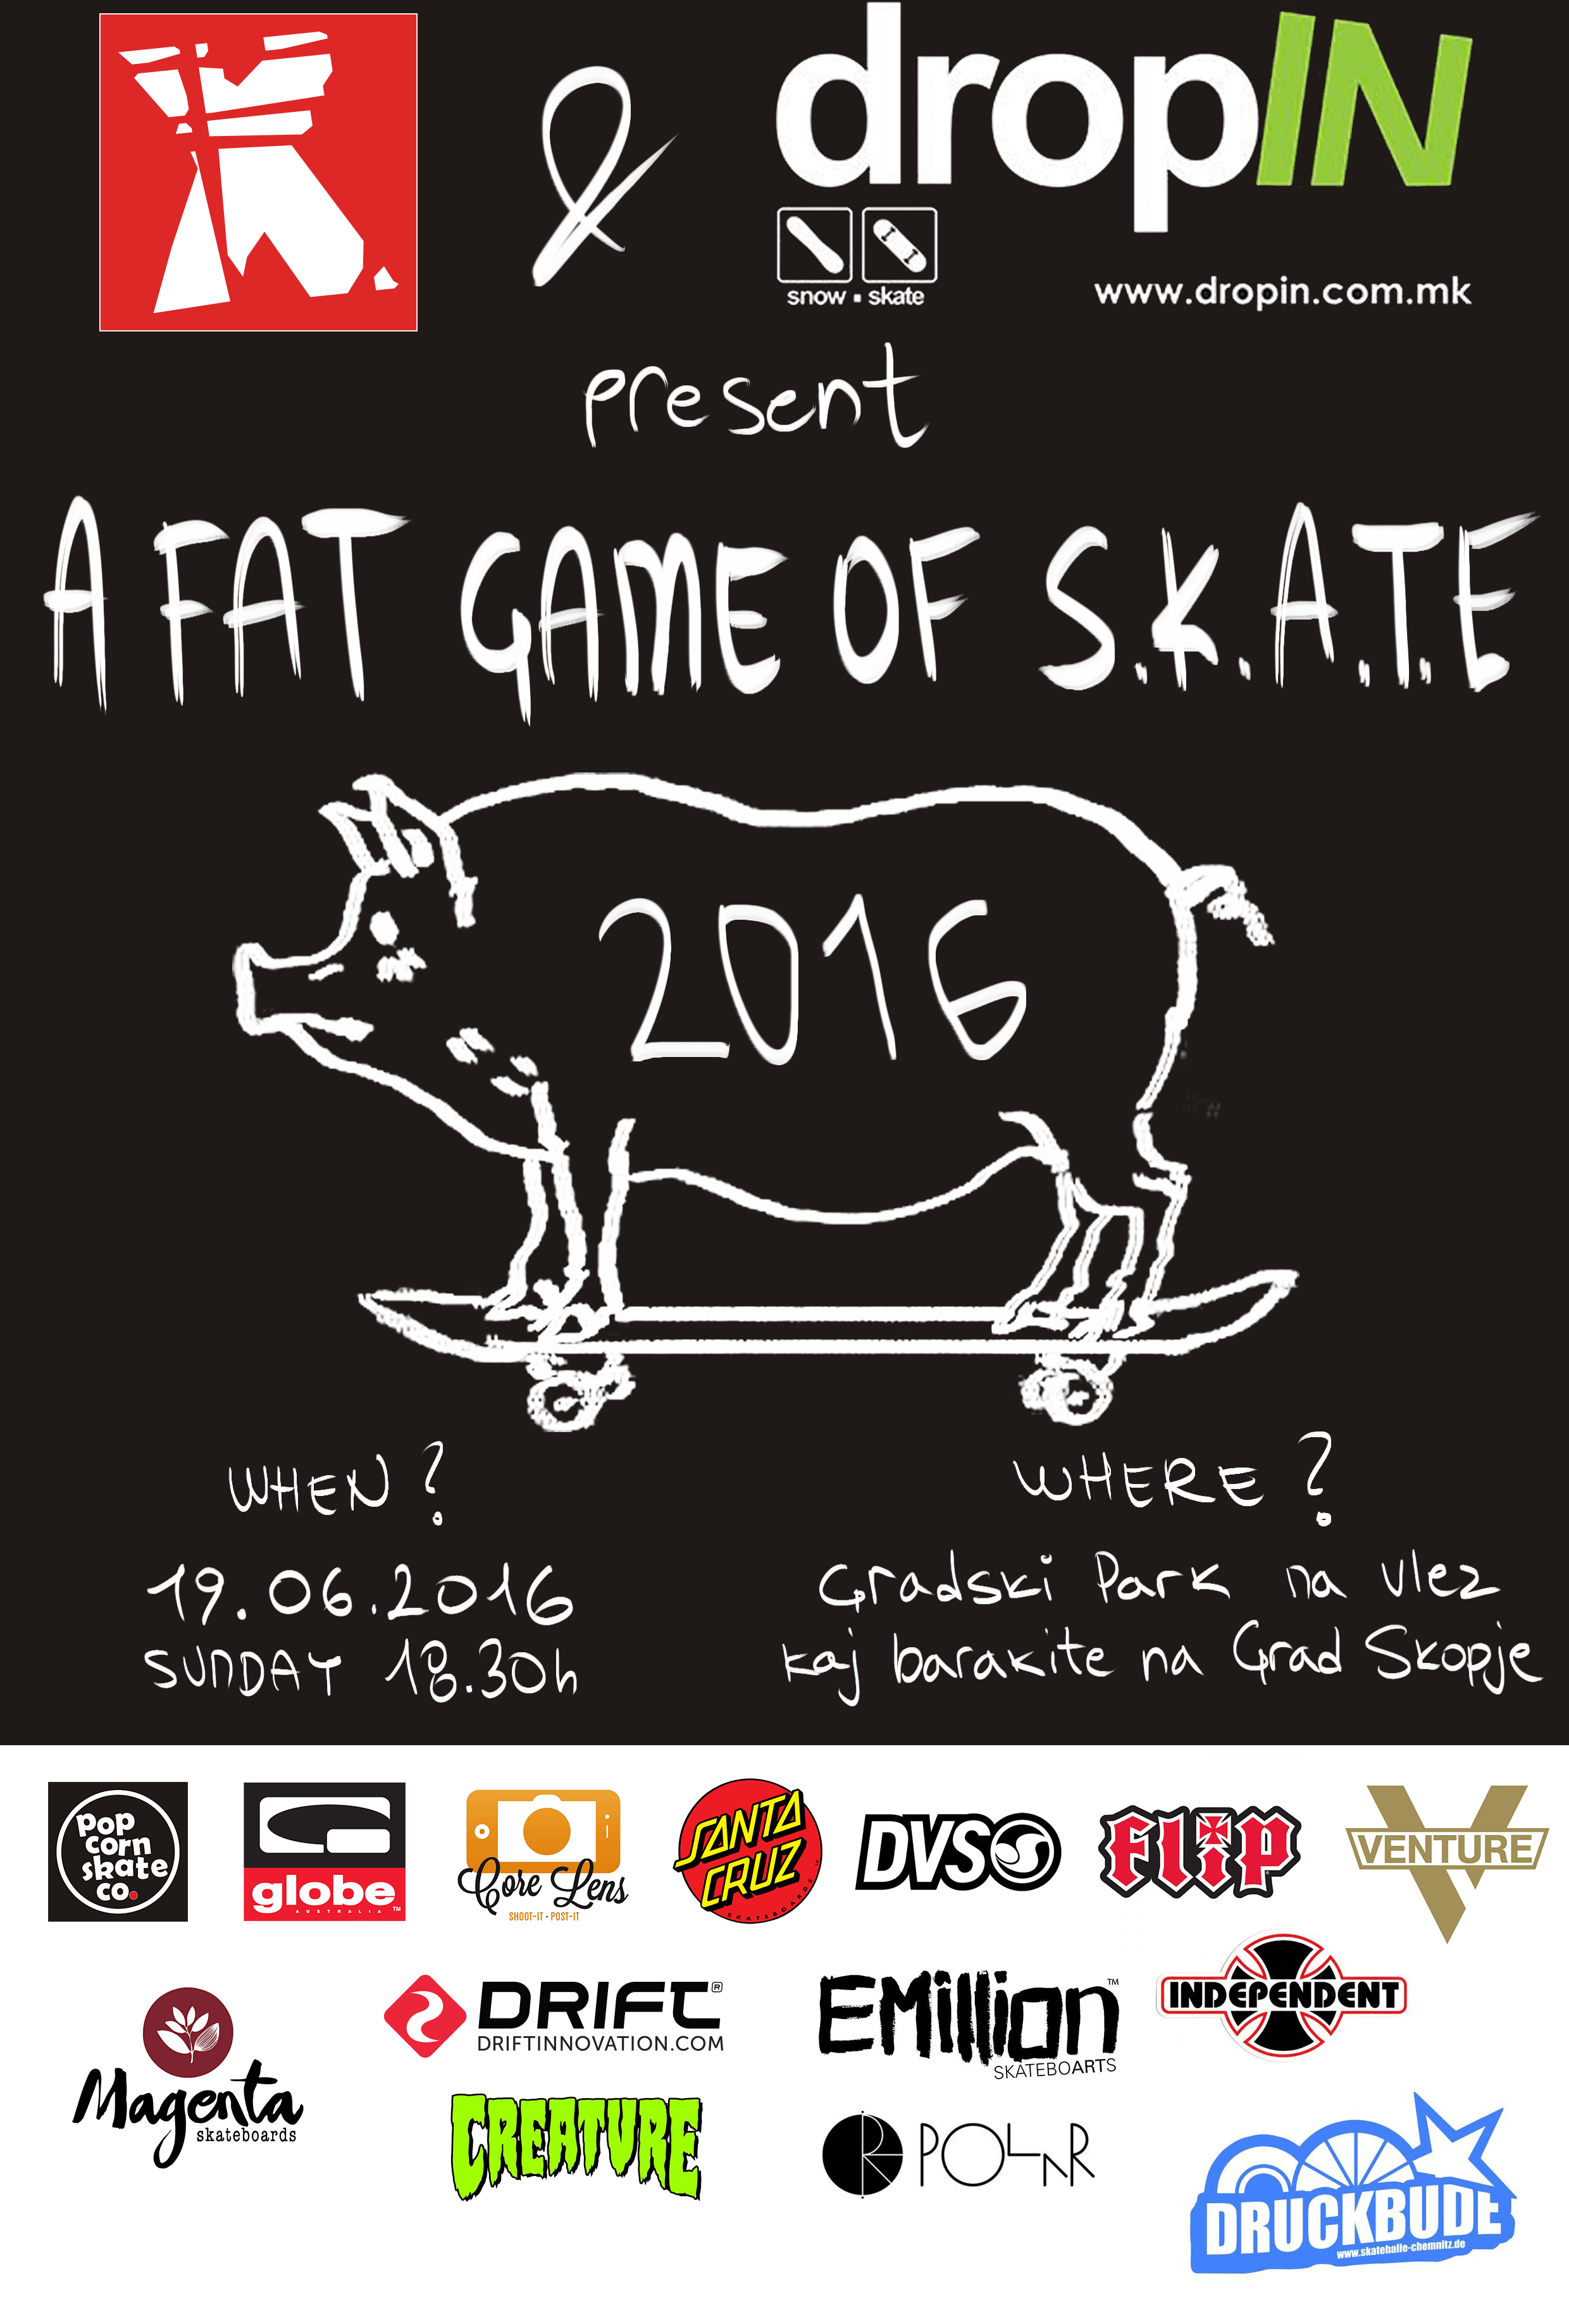 A FAT GAME OF SKATE